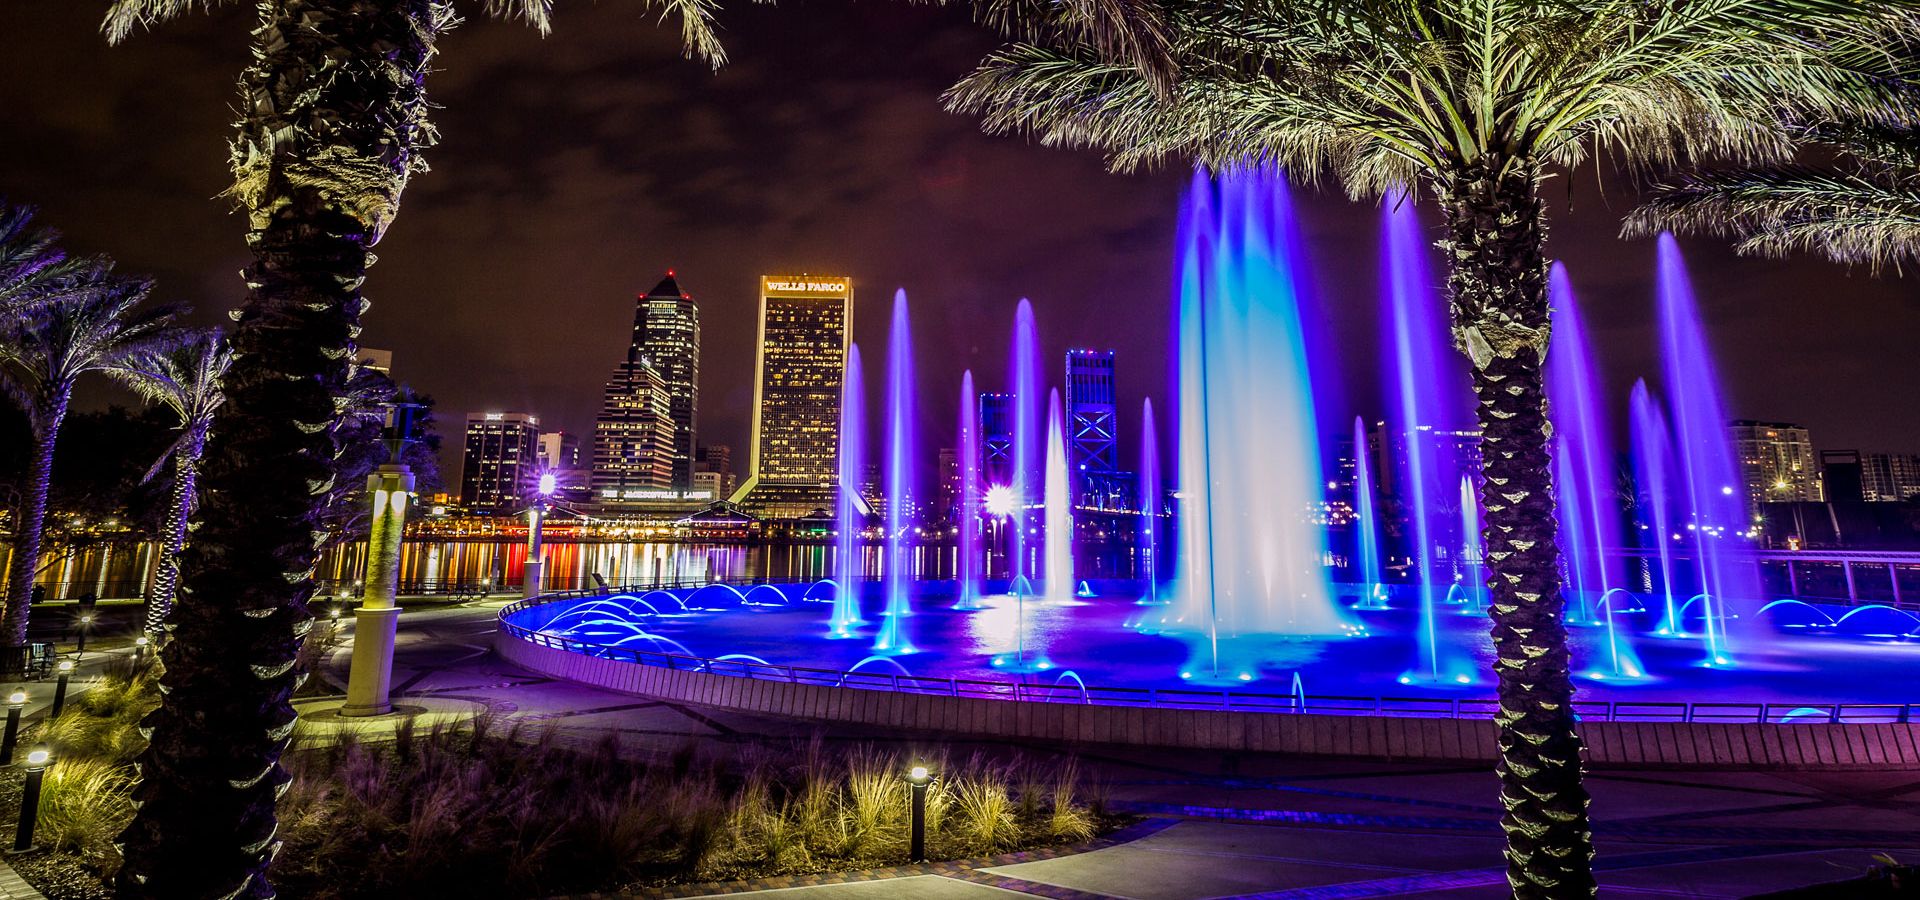 Photo Courtesy of www.visitjacksonville.com